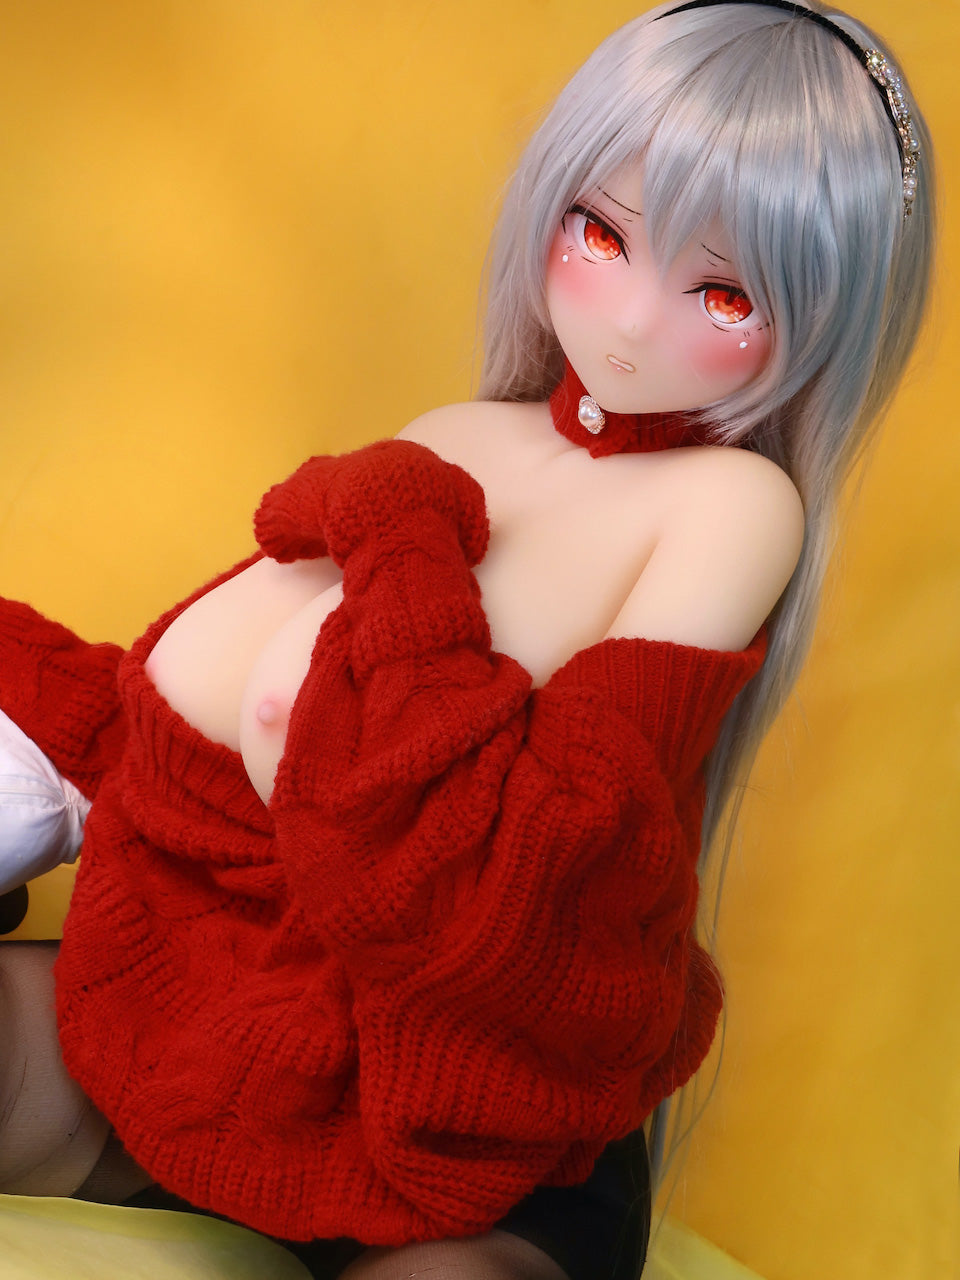 [AOTUME Doll] 155cm / Hcup - Anime Sex Doll, Red Sweater